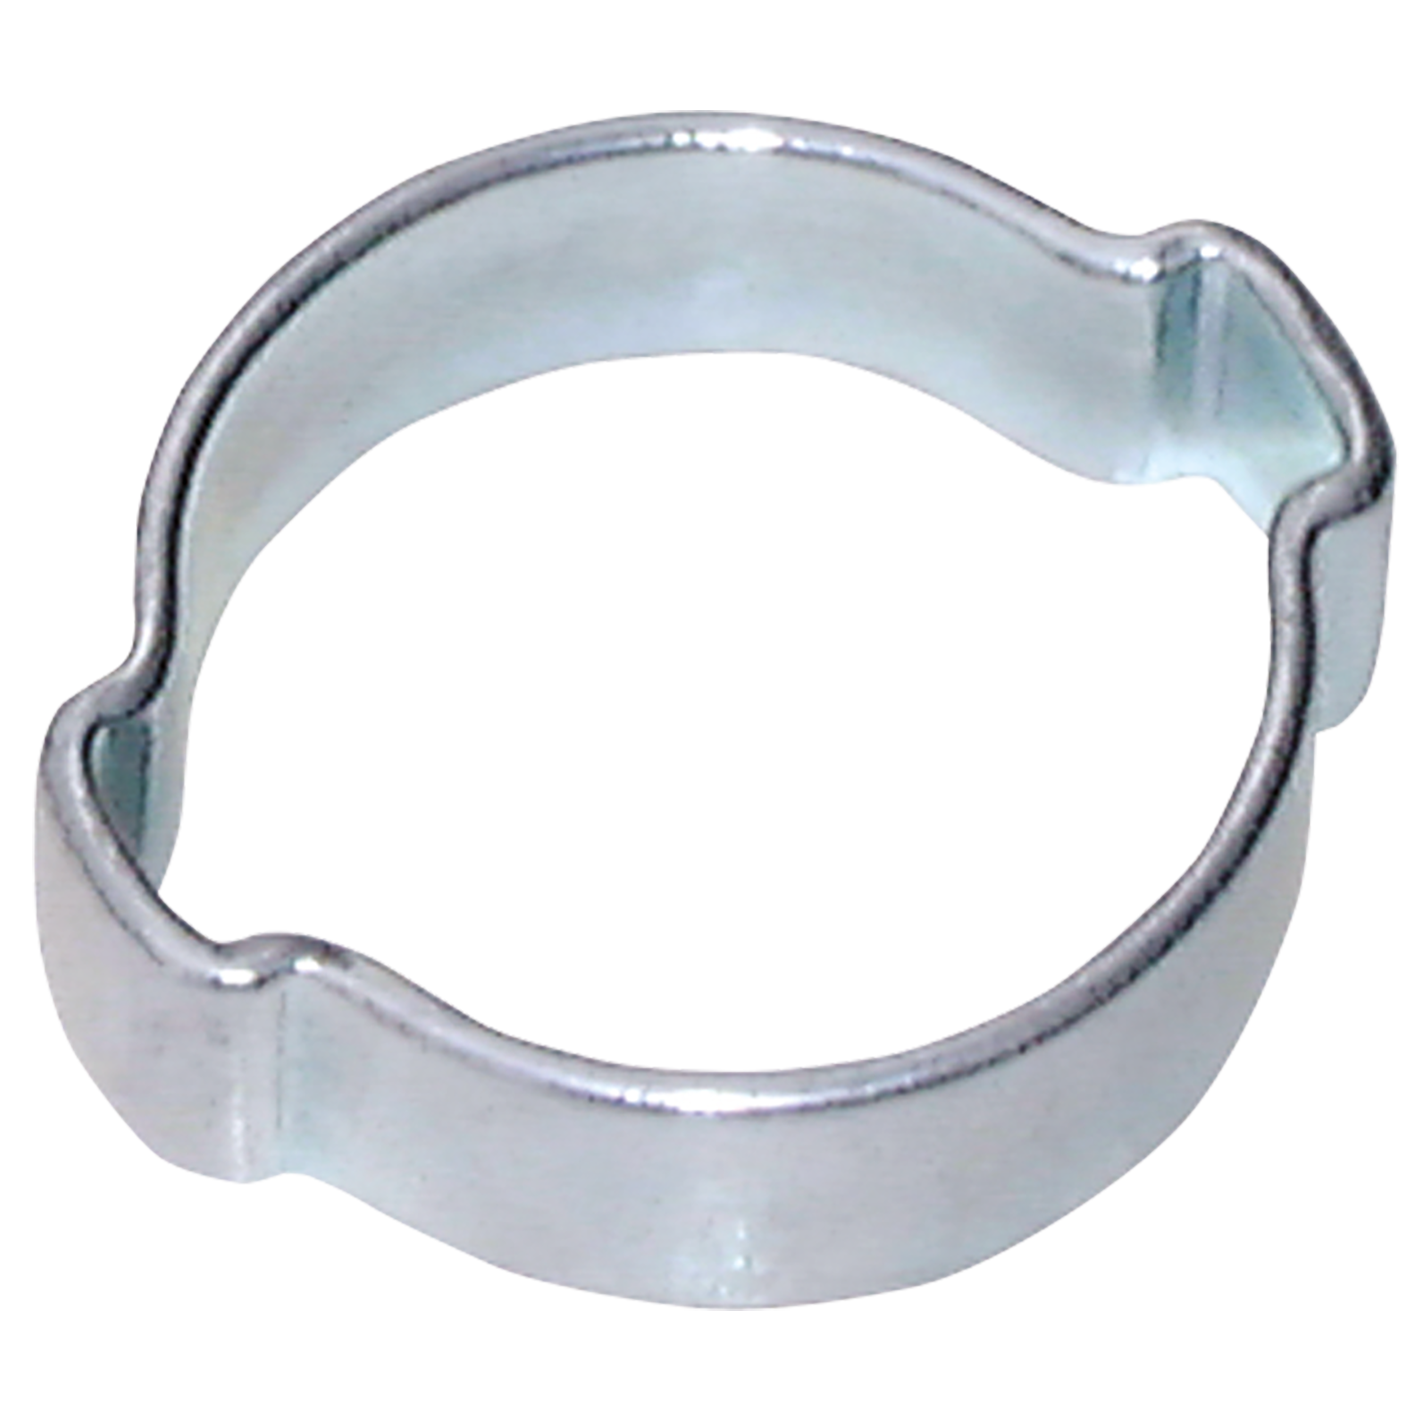 22.0-25.0MM 2-EAR STEEL CLAMP PLATED